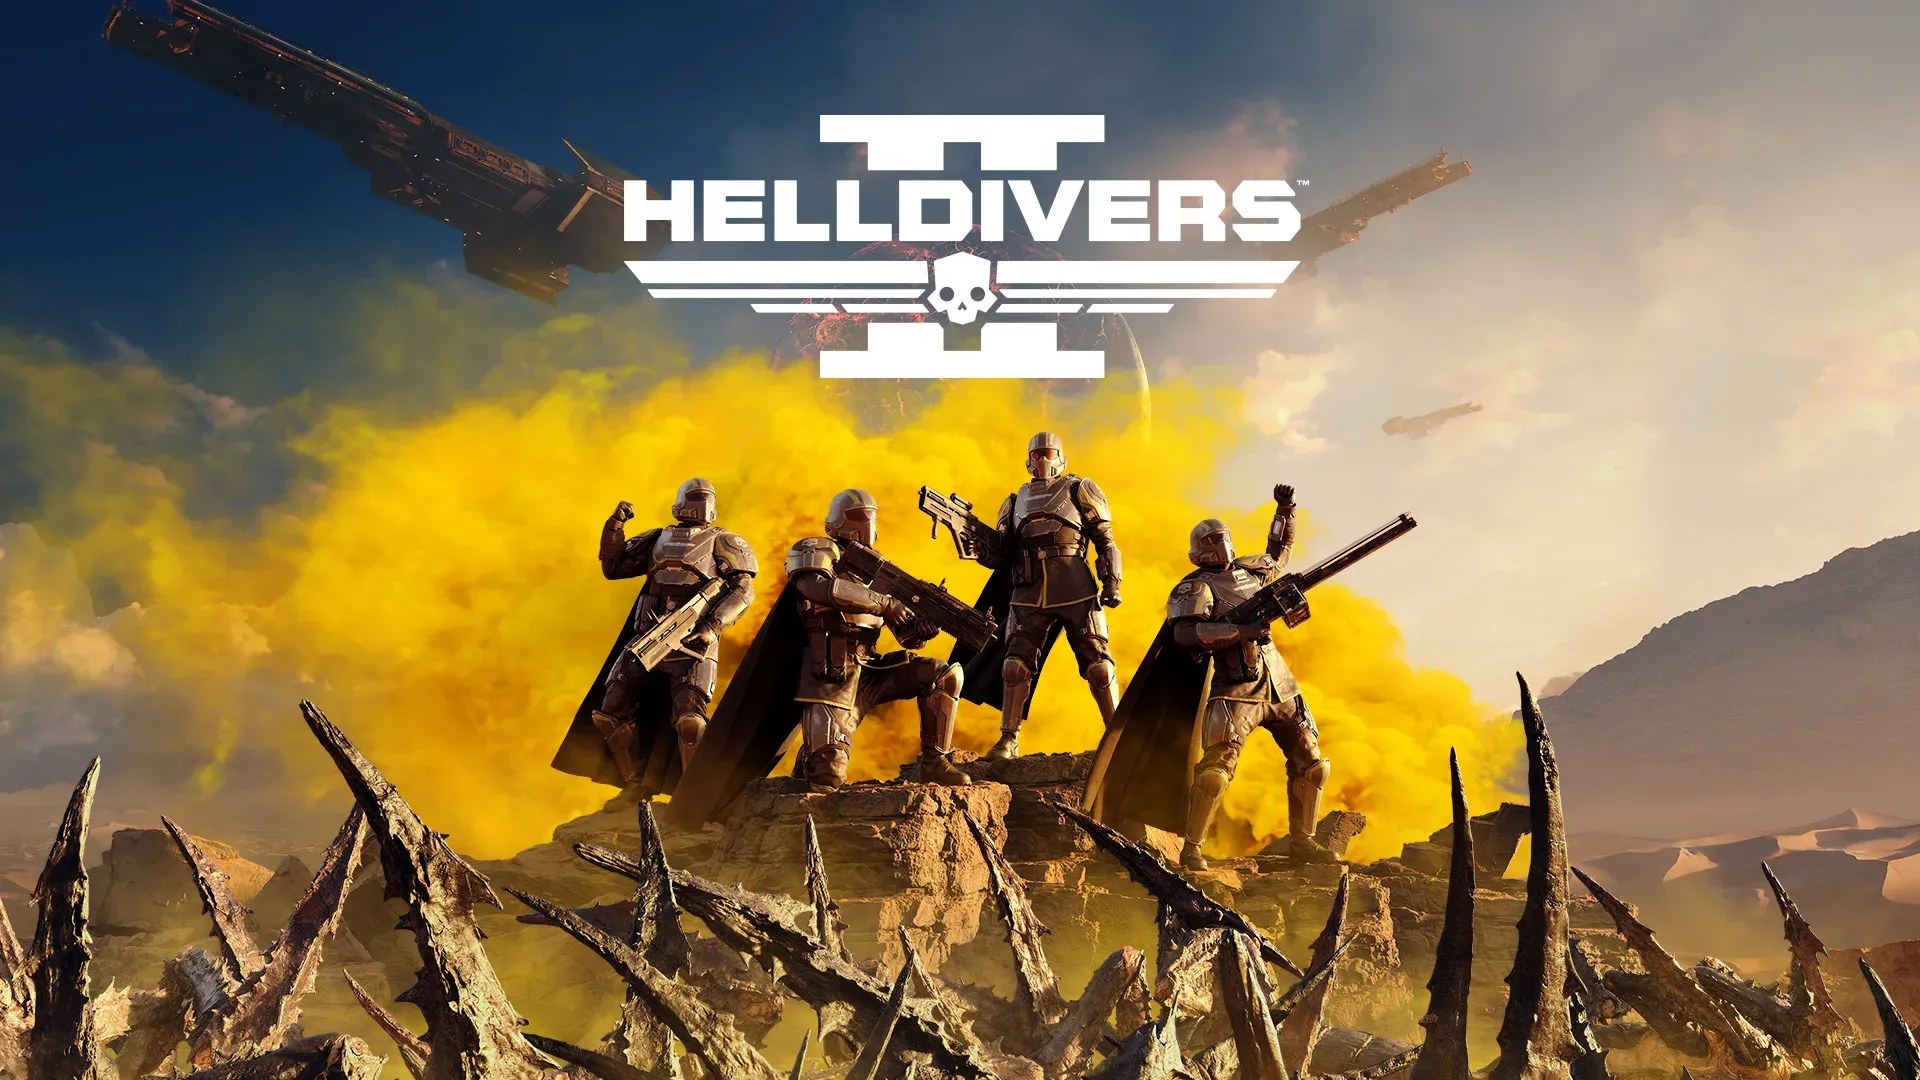 The Helldivers 2 logo displayed above a squad of Helldivers stand on a cliff, overlooking a desert scene